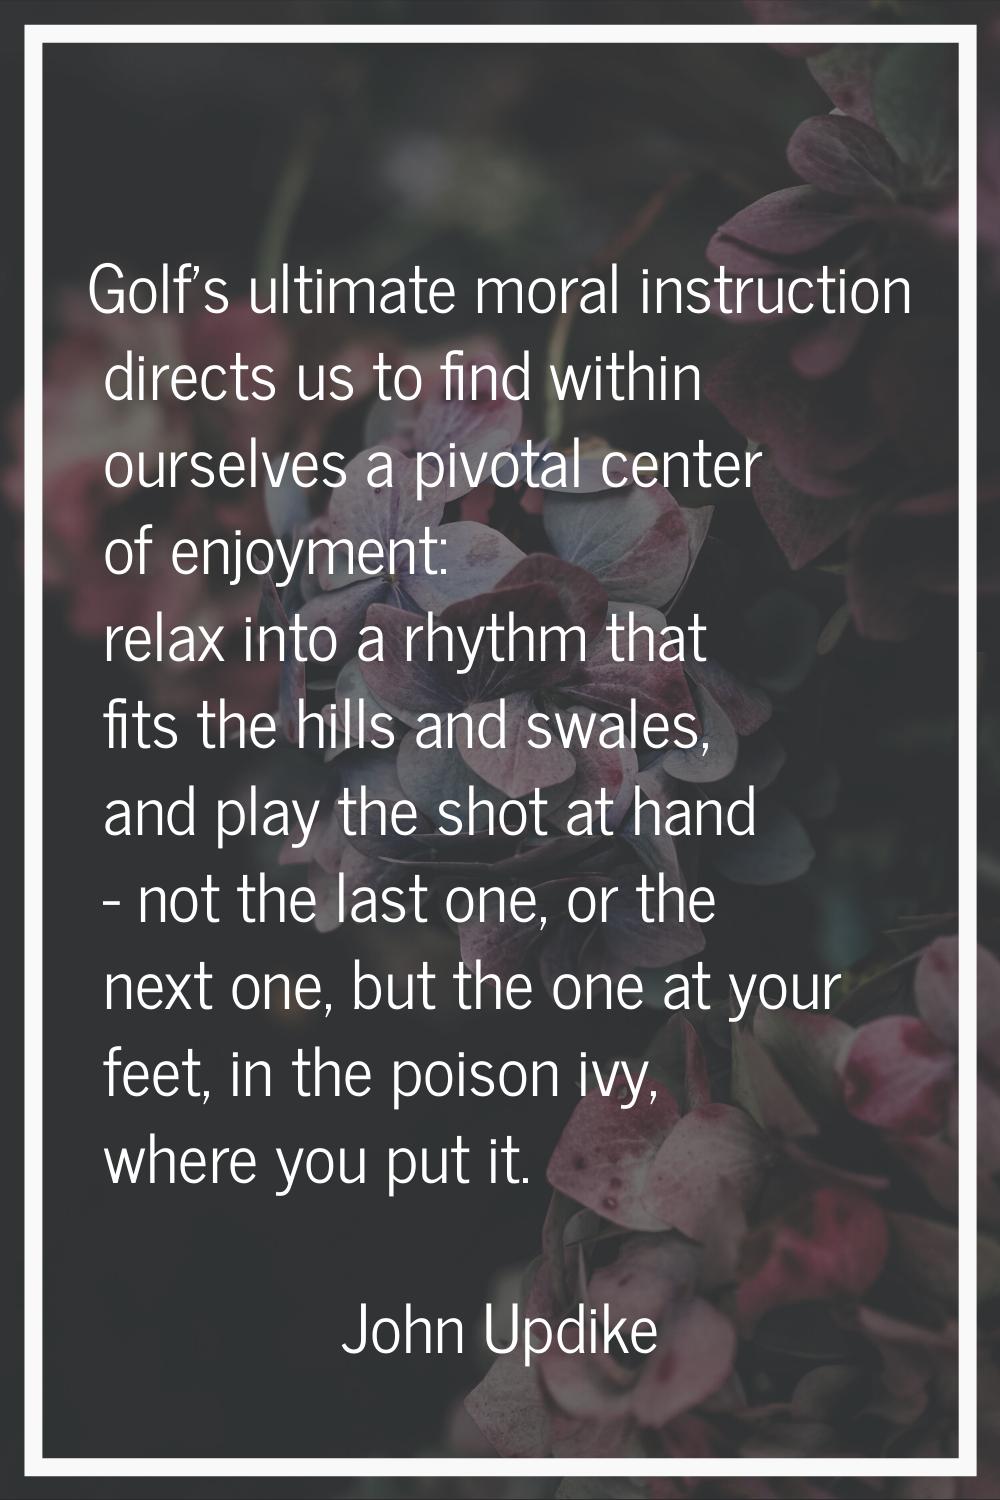 Golf's ultimate moral instruction directs us to find within ourselves a pivotal center of enjoyment